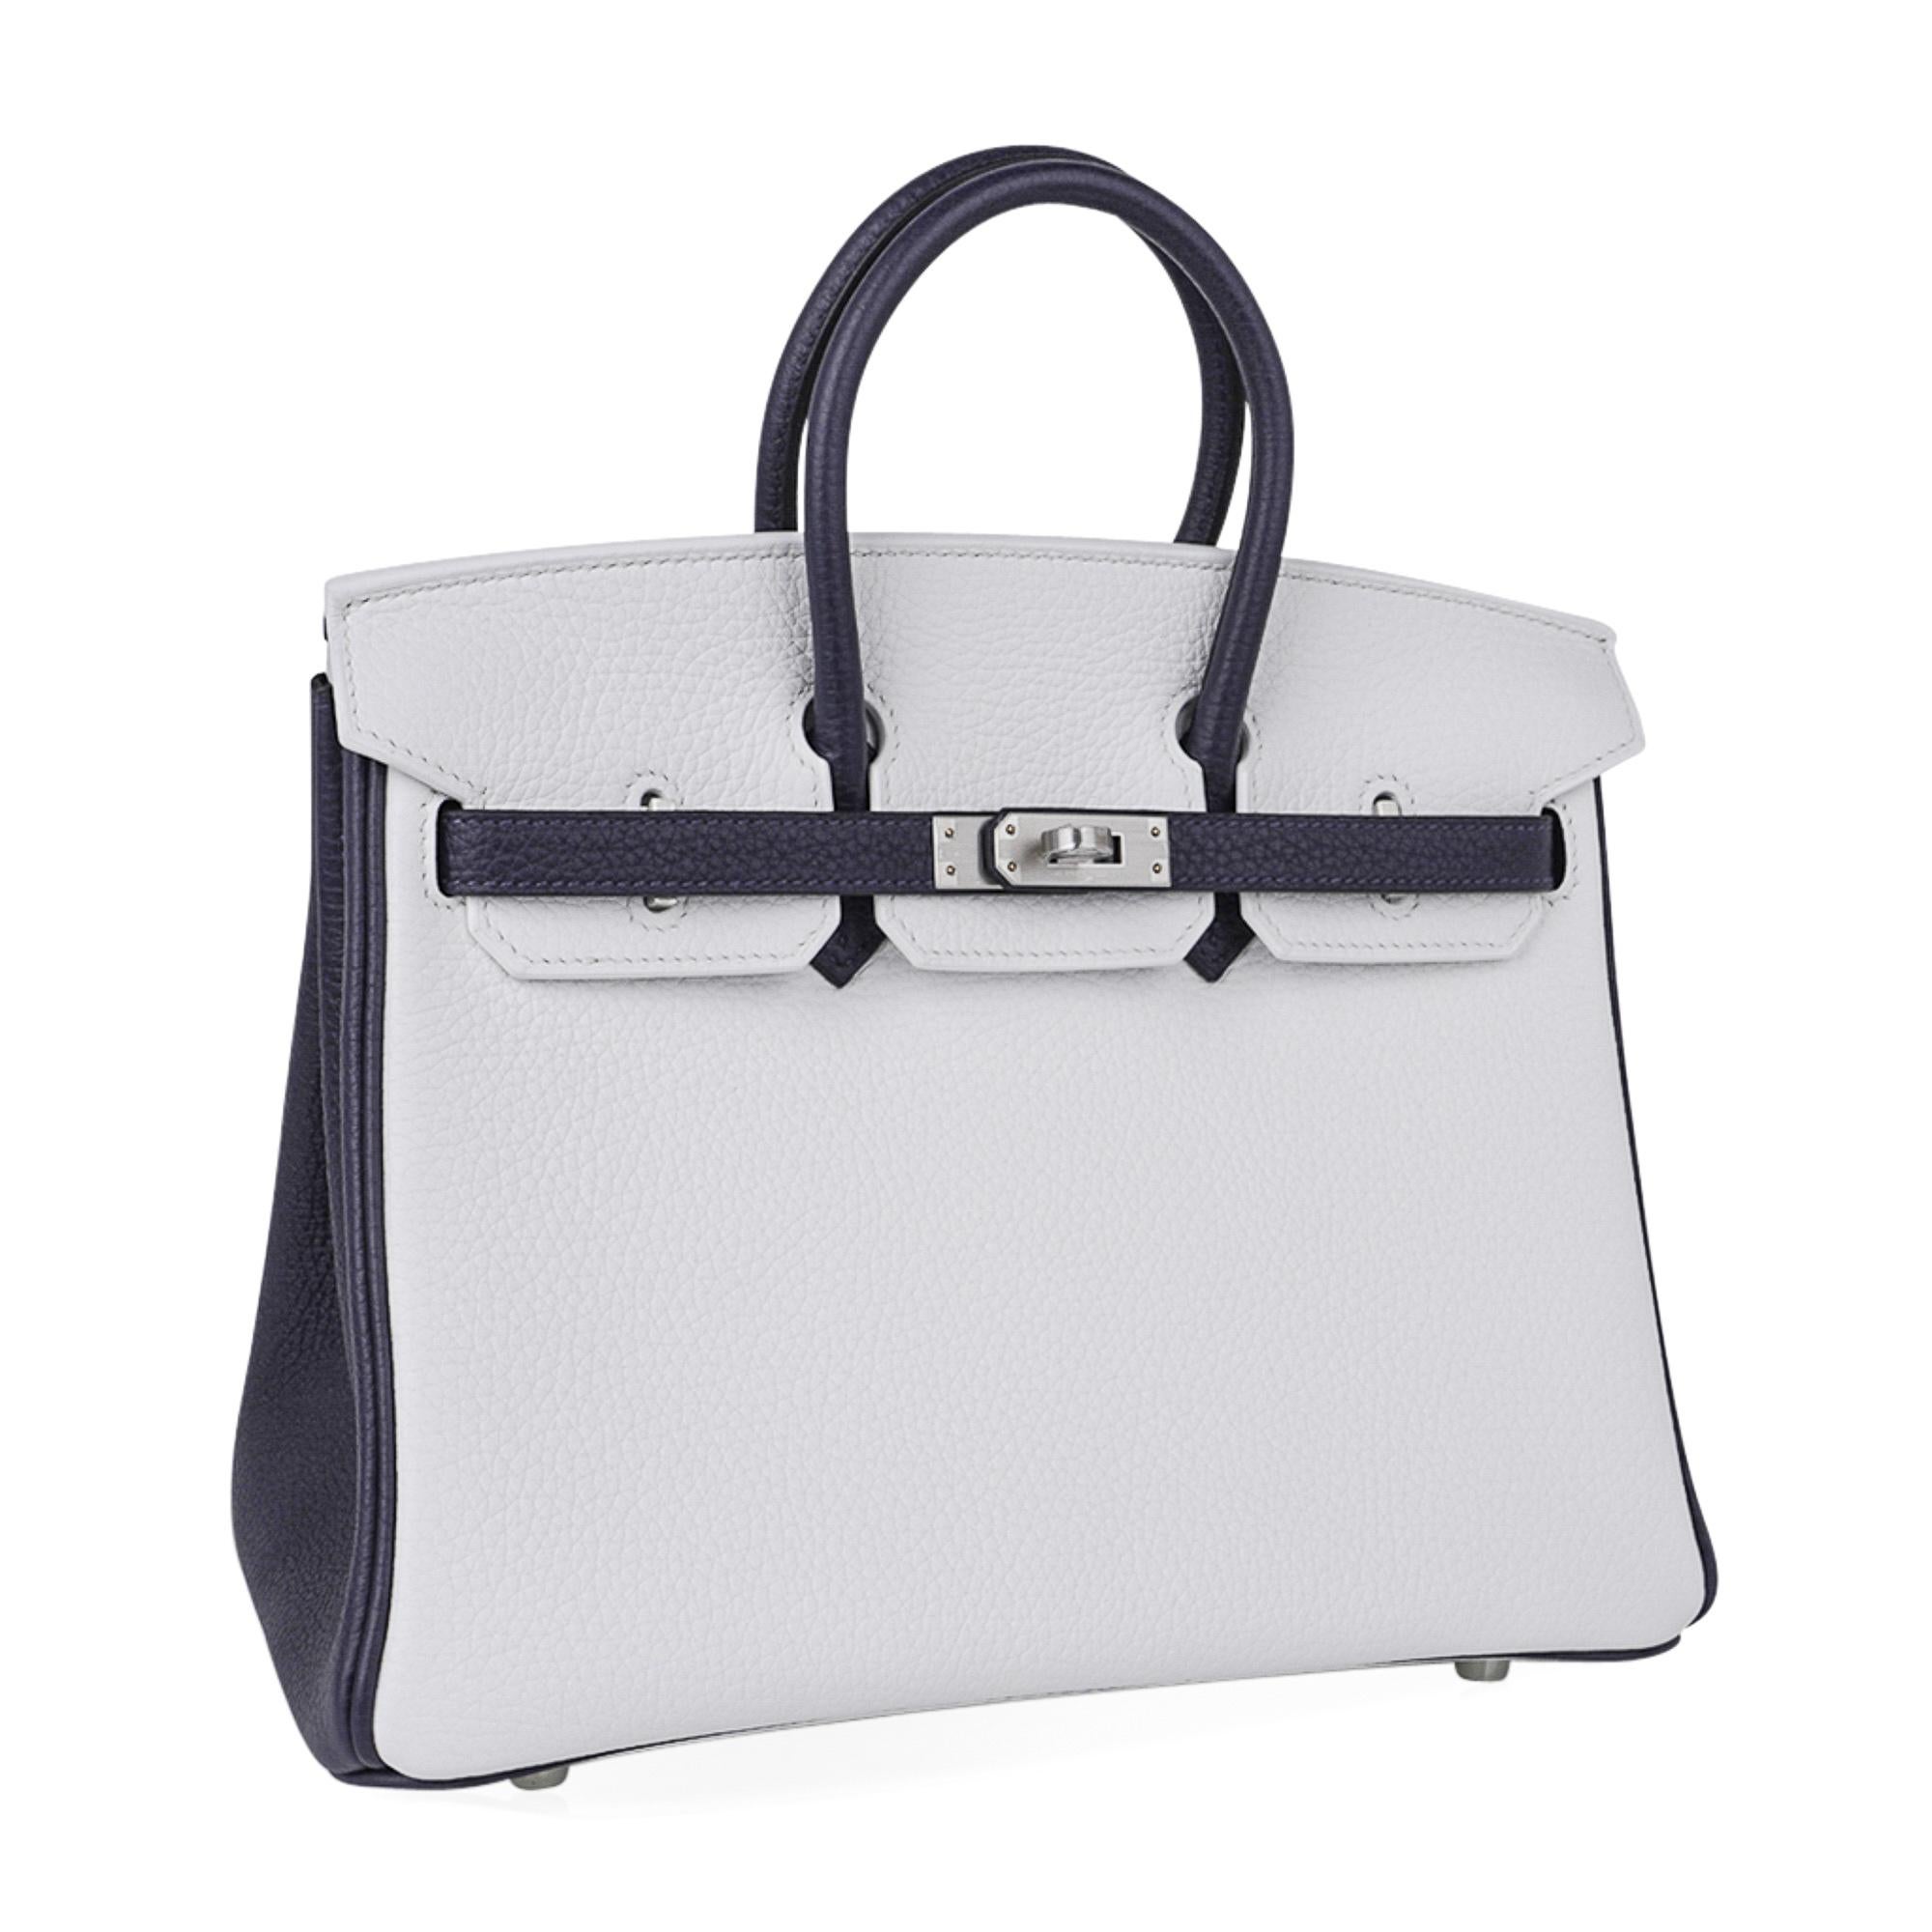 Mightychic offers an Hermes Birkin HSS 25 Horseshoe Stamp bag featured in White and Blue Nuit.
Beautiful crisp bag in clemence leather.
Accentuated with brushed palladium hardware.
Handles, straps, sides and interior are rich deep Blue Nuit.
NEW or